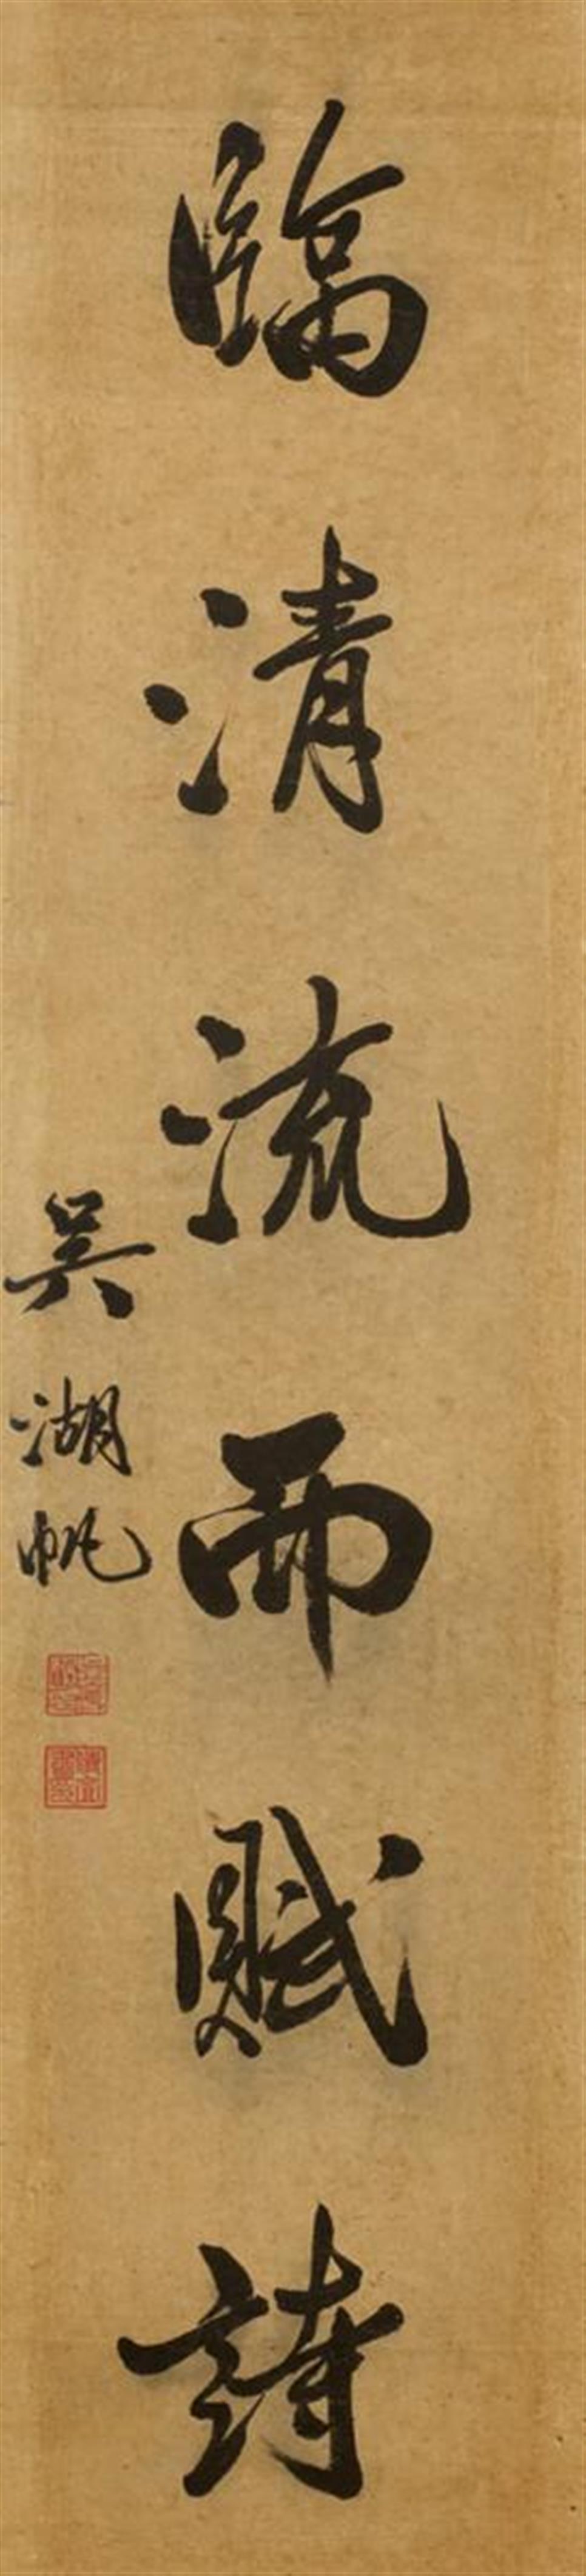 Wu Hufan, in the manner of - Calligraphy with a line of the poem "Gui qu lai xi ci" („Ballad of Returning Home“) by Tao Yuanming (365-427). Hanging scroll. Ink and gold on paper. Inscribed Wu Hufan and two ... - image-1